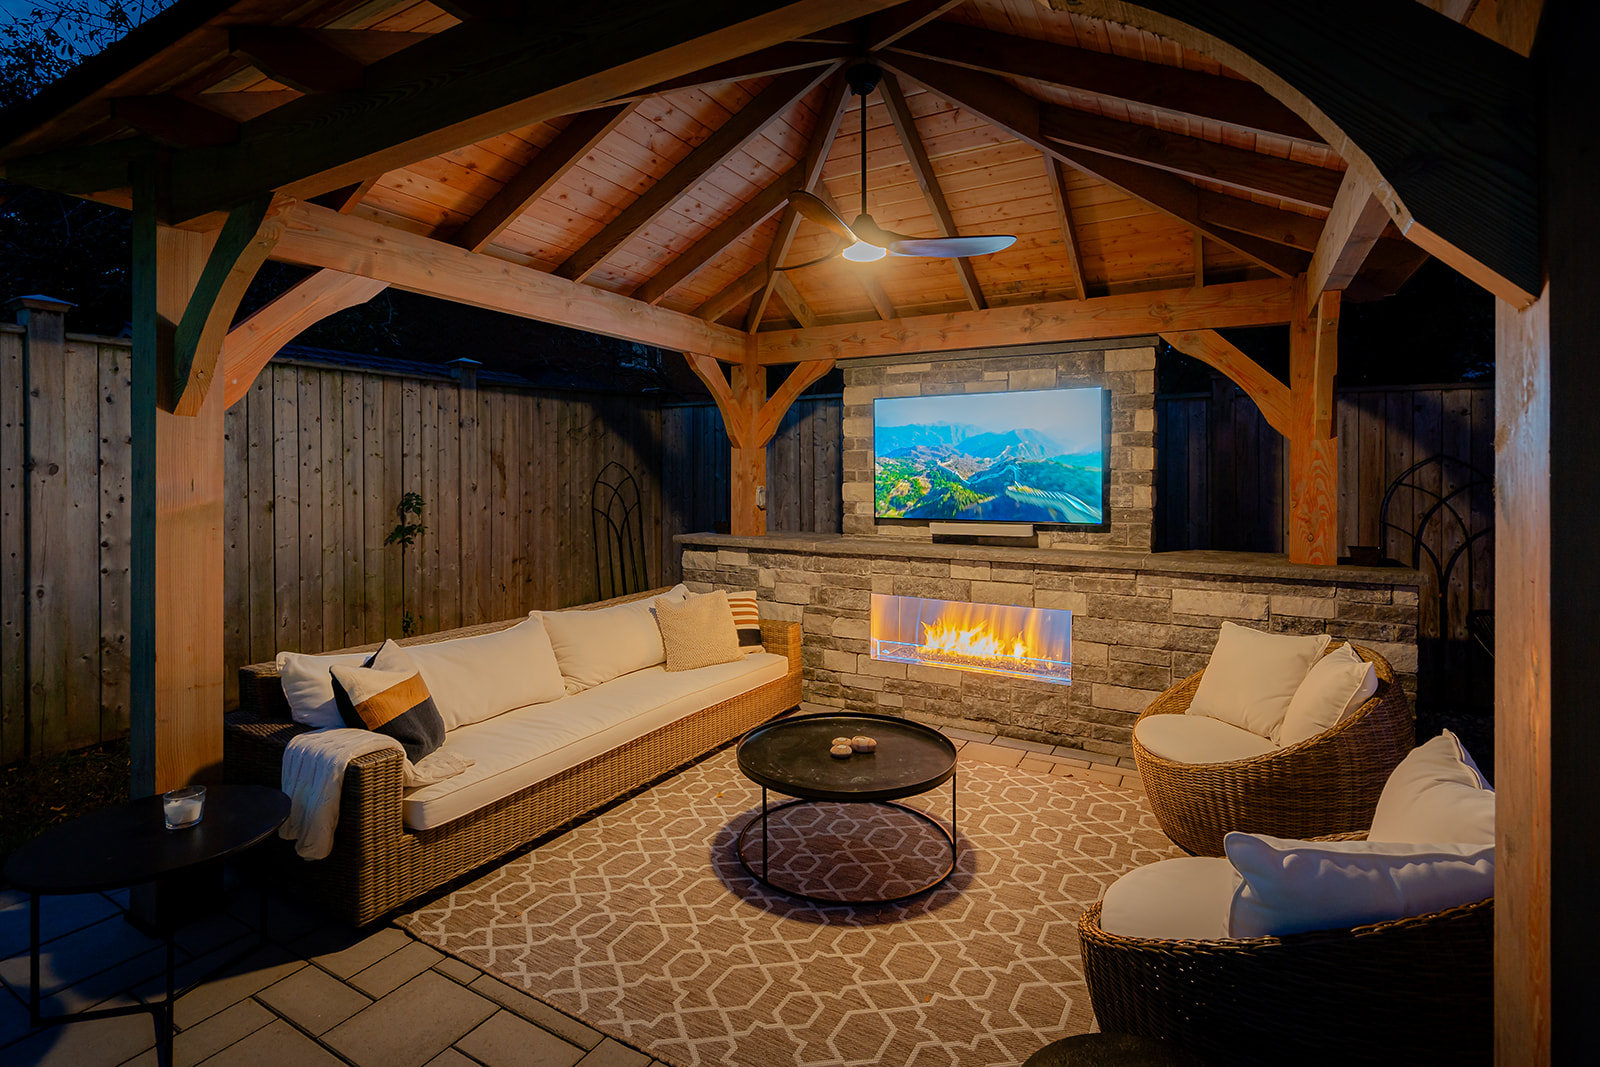 An outdoor patio set with the tv on underneath the gazebo.